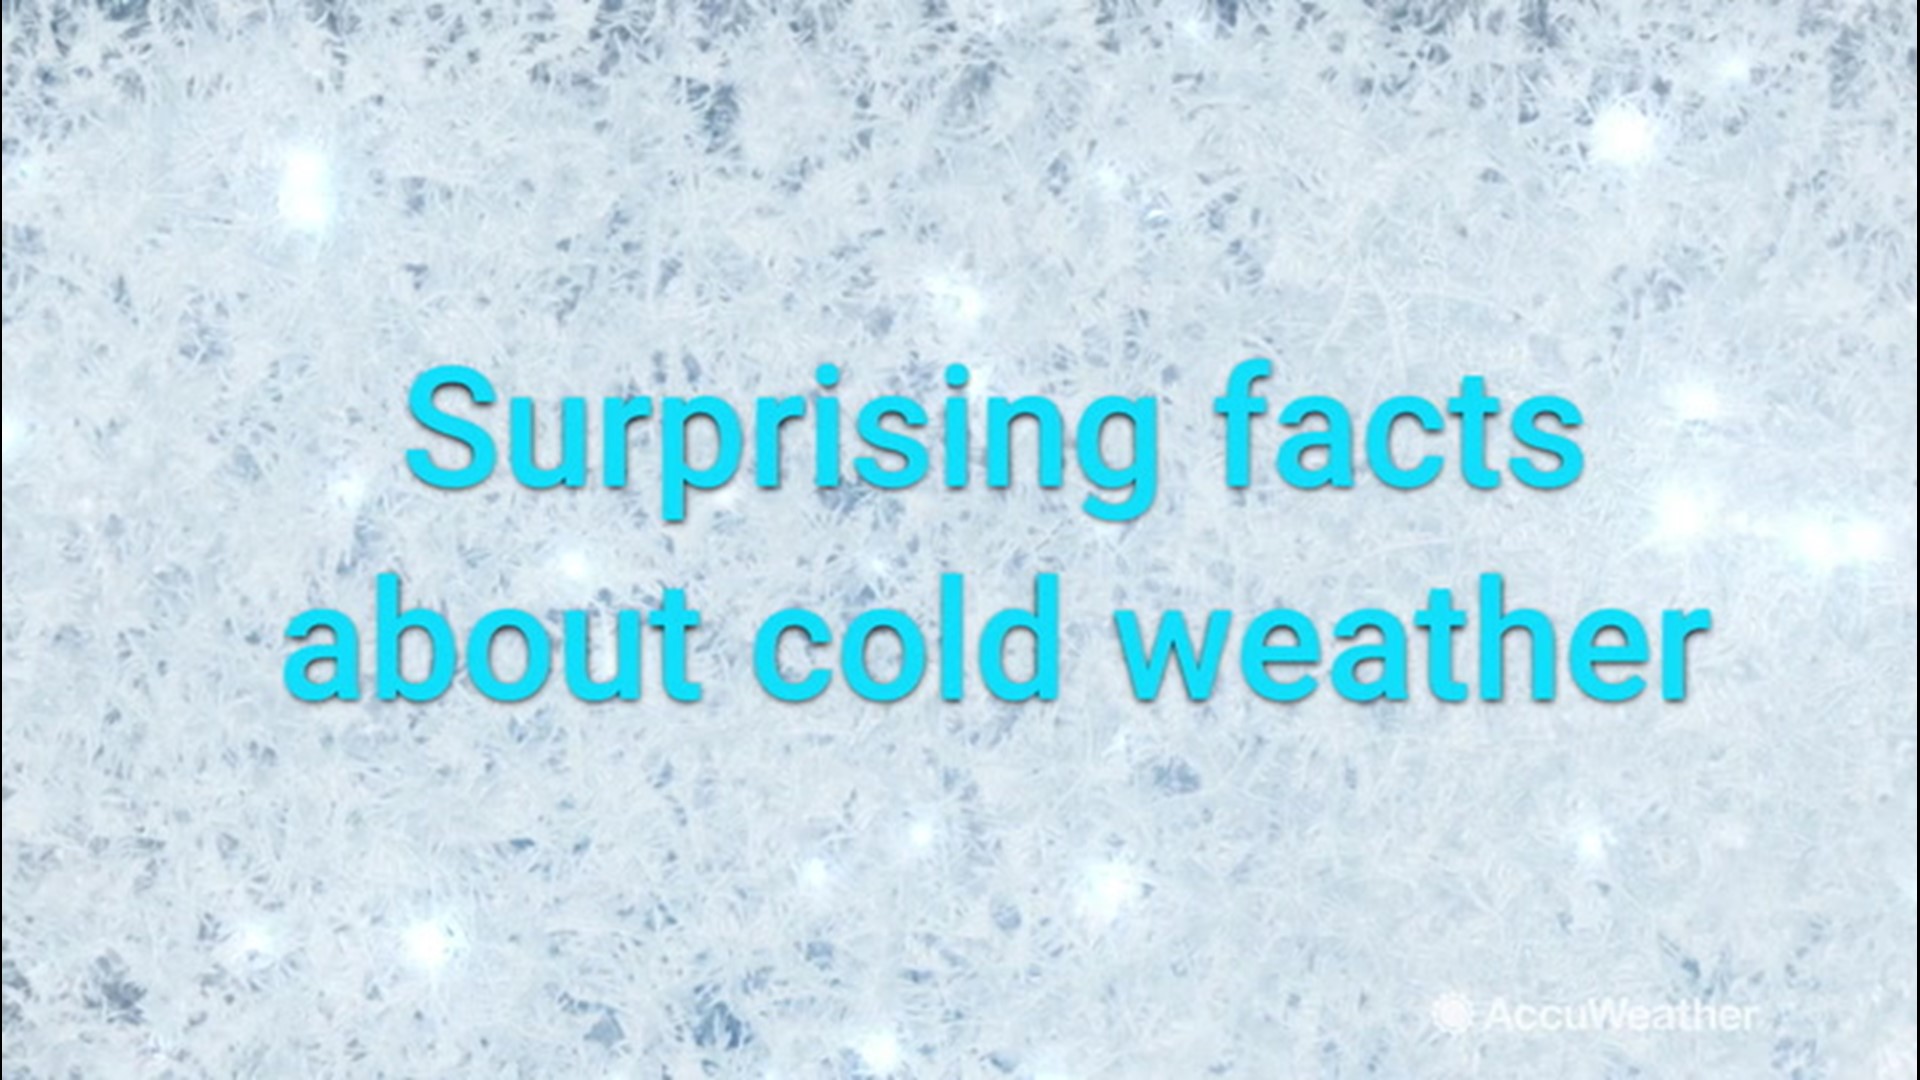 Ever heard of cryophobia? Did you know people die from the cold 20 times more often than from the heat? Check out these suprising facts about the cold.